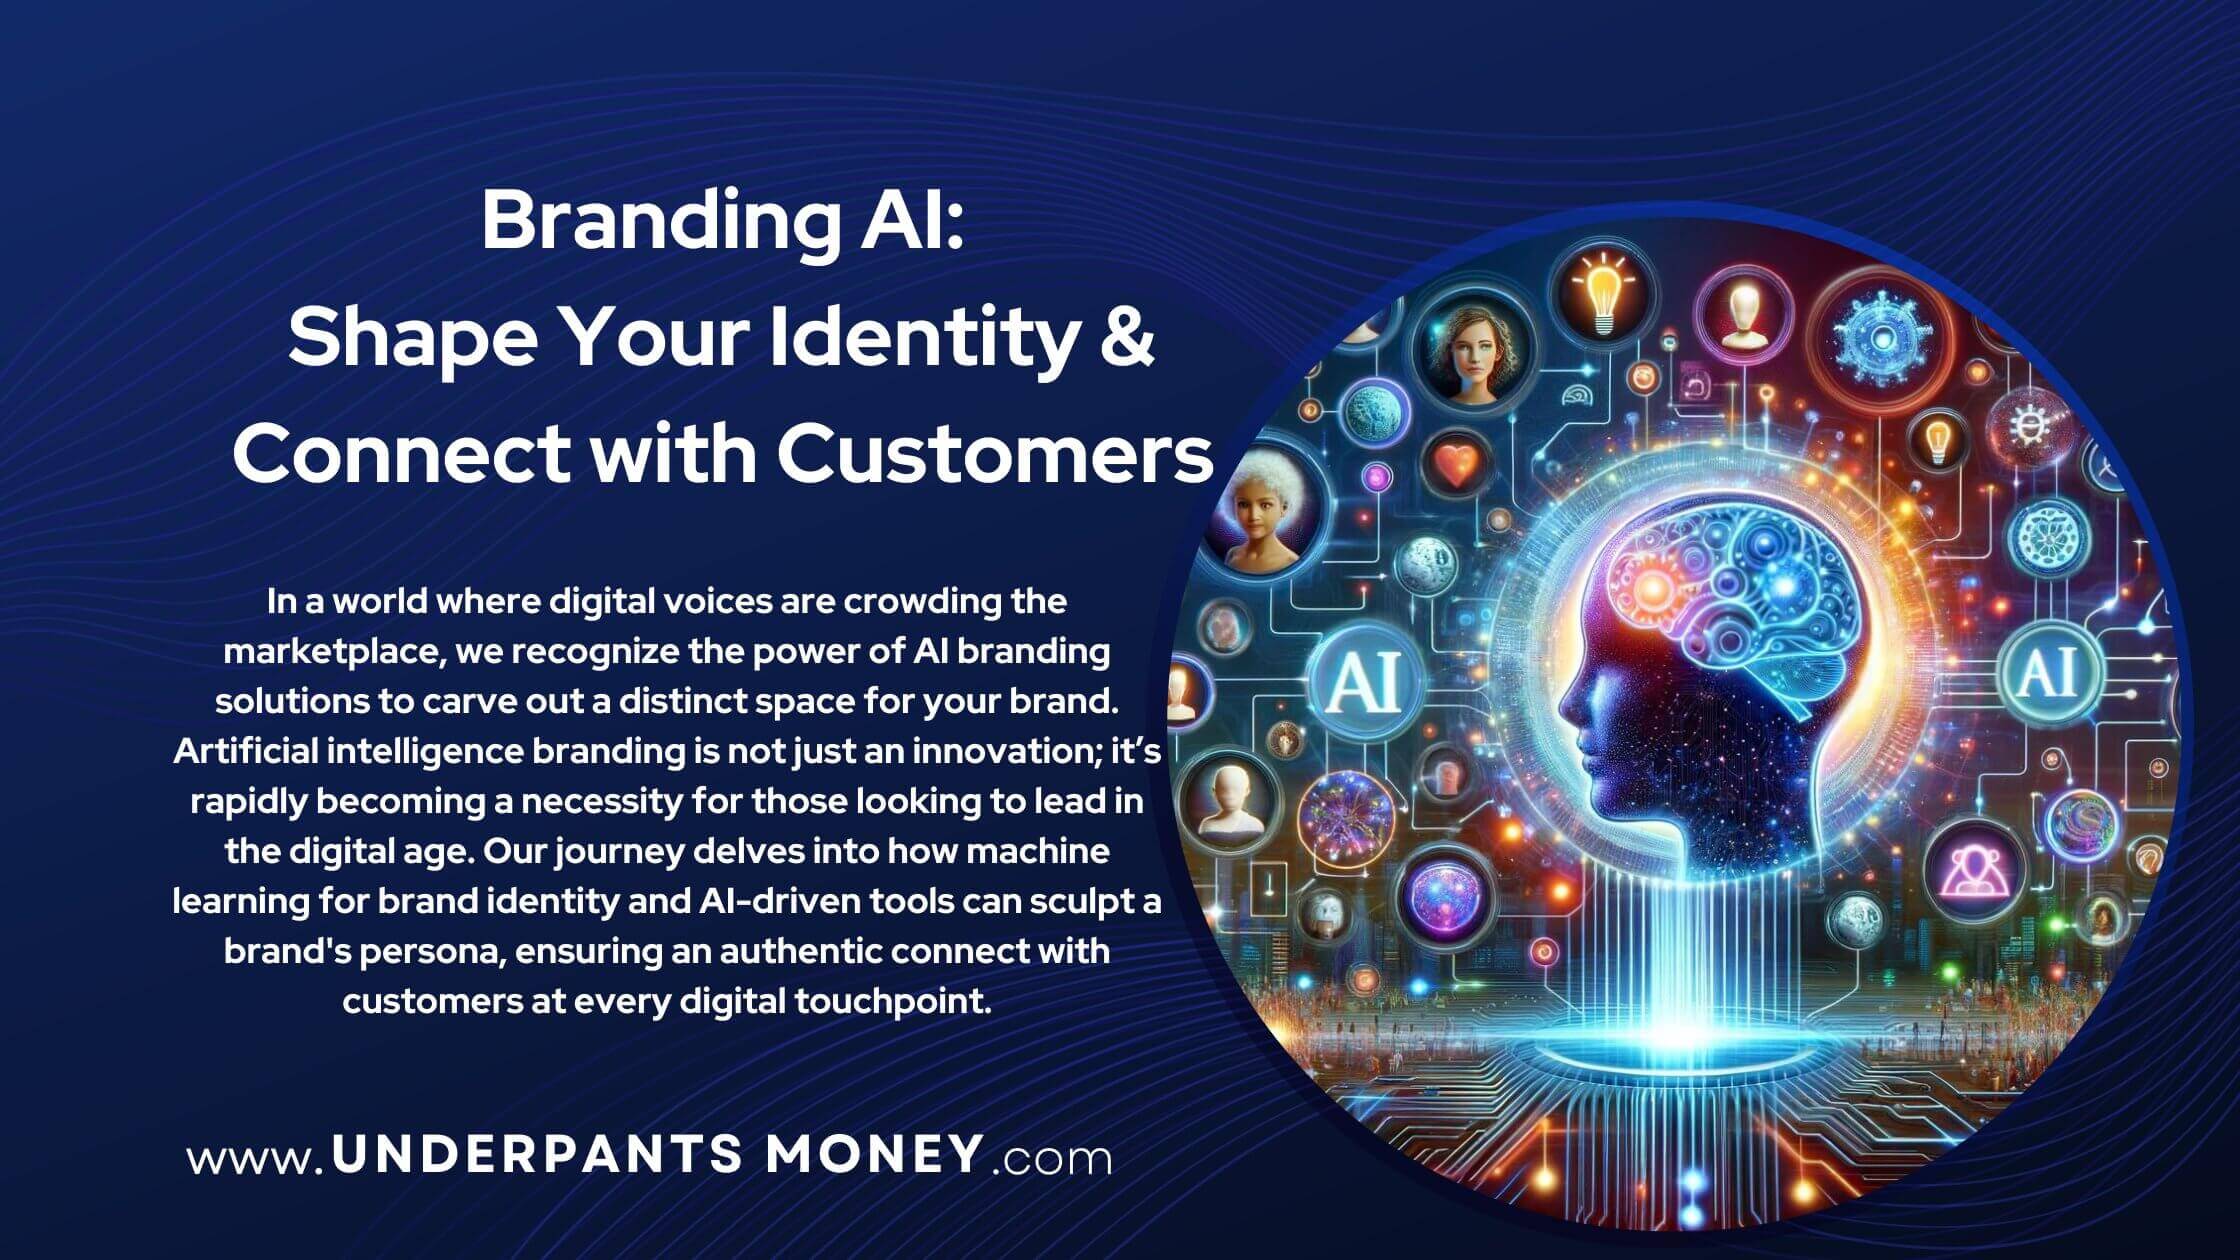 Branding AI title and description on blue with image of AI brain connecting personal branding elements